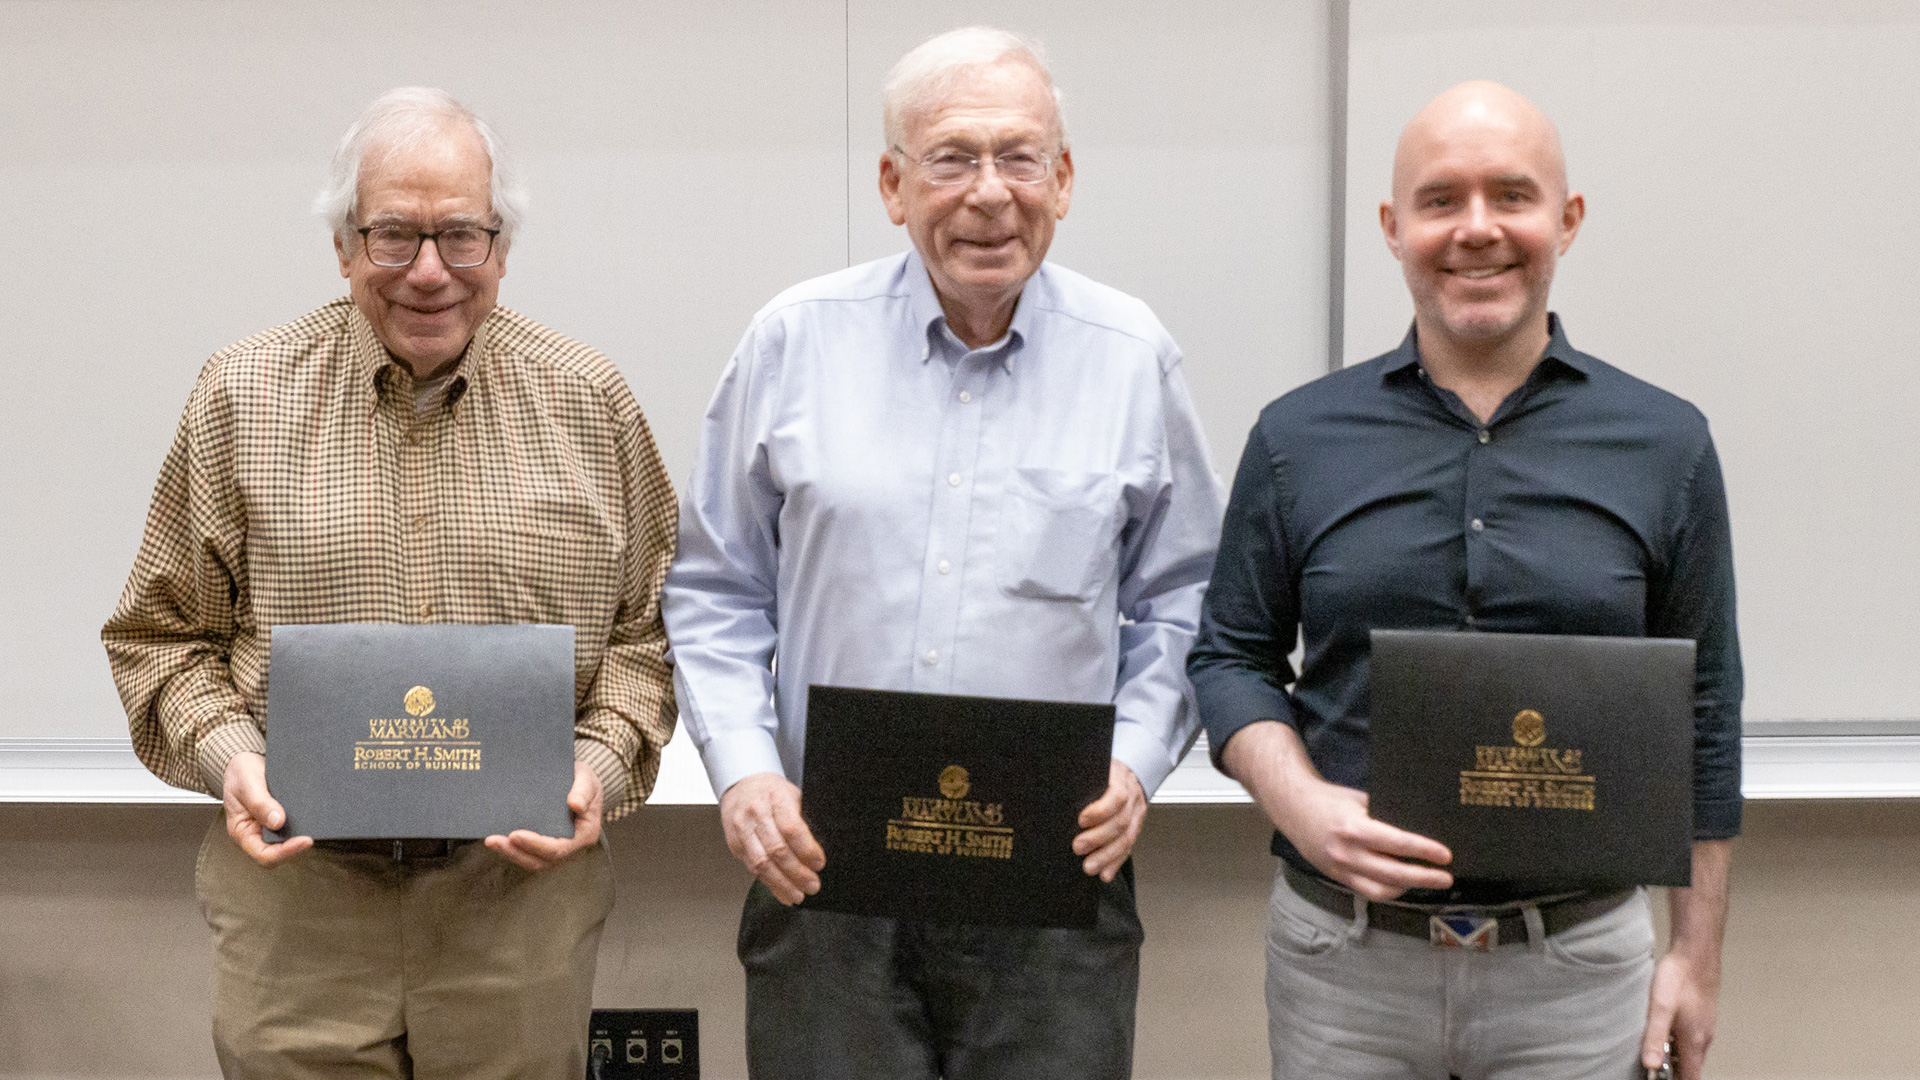 Thomas Corsi, David Kass, and Nicholas Seybert display their awards, recognizing their exceptional contributions to the Smith School community.